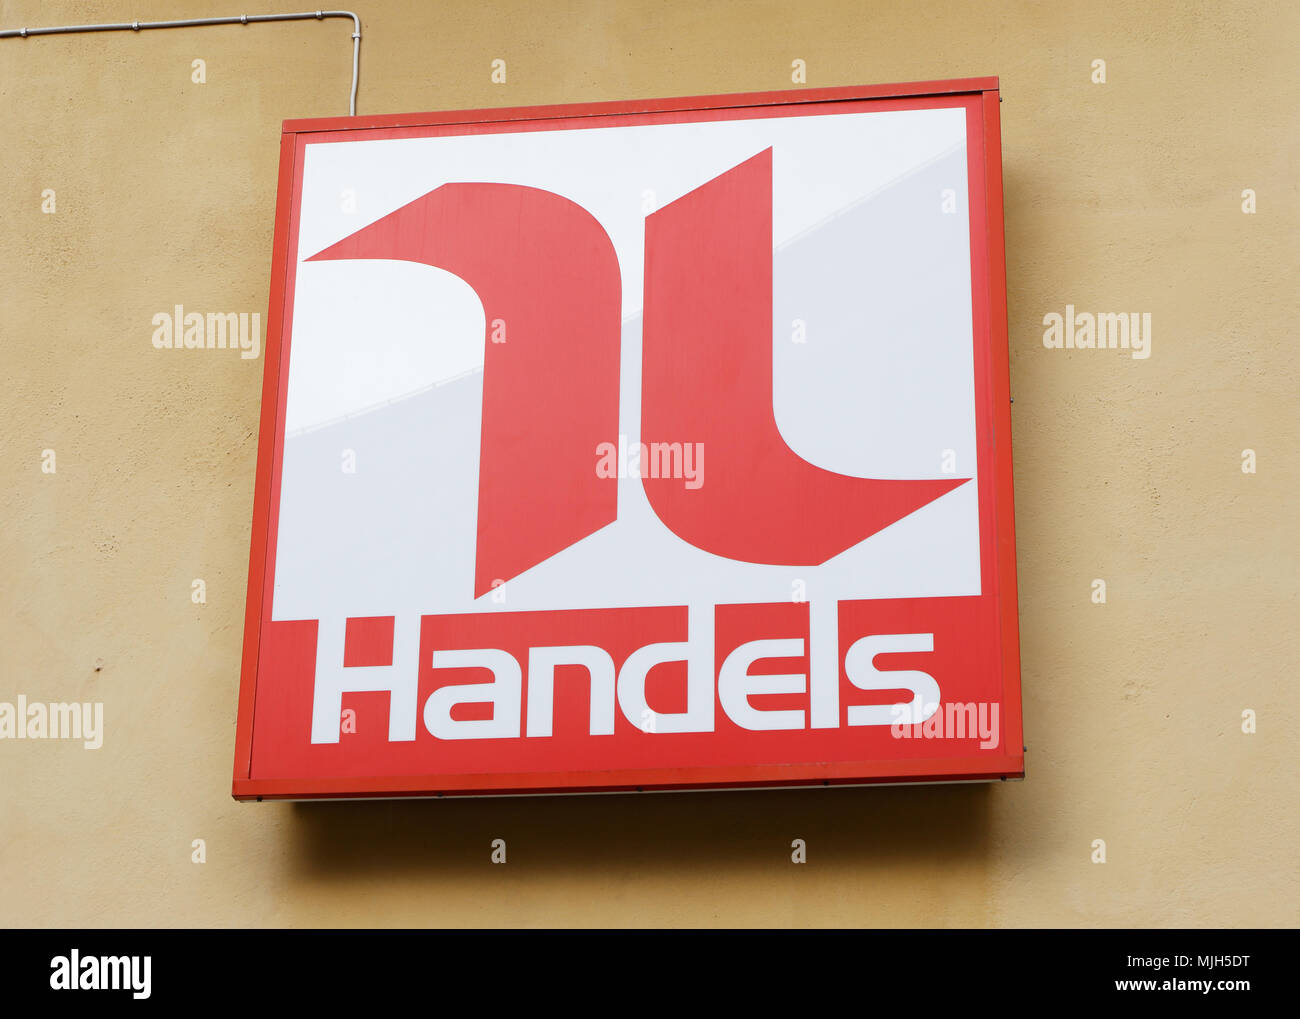 Stockholm, Sweden - September 20, 2016: The sign and logo for the Swedish trade union Handels at the office located at Norra bantorget in Stockholm. Stock Photo